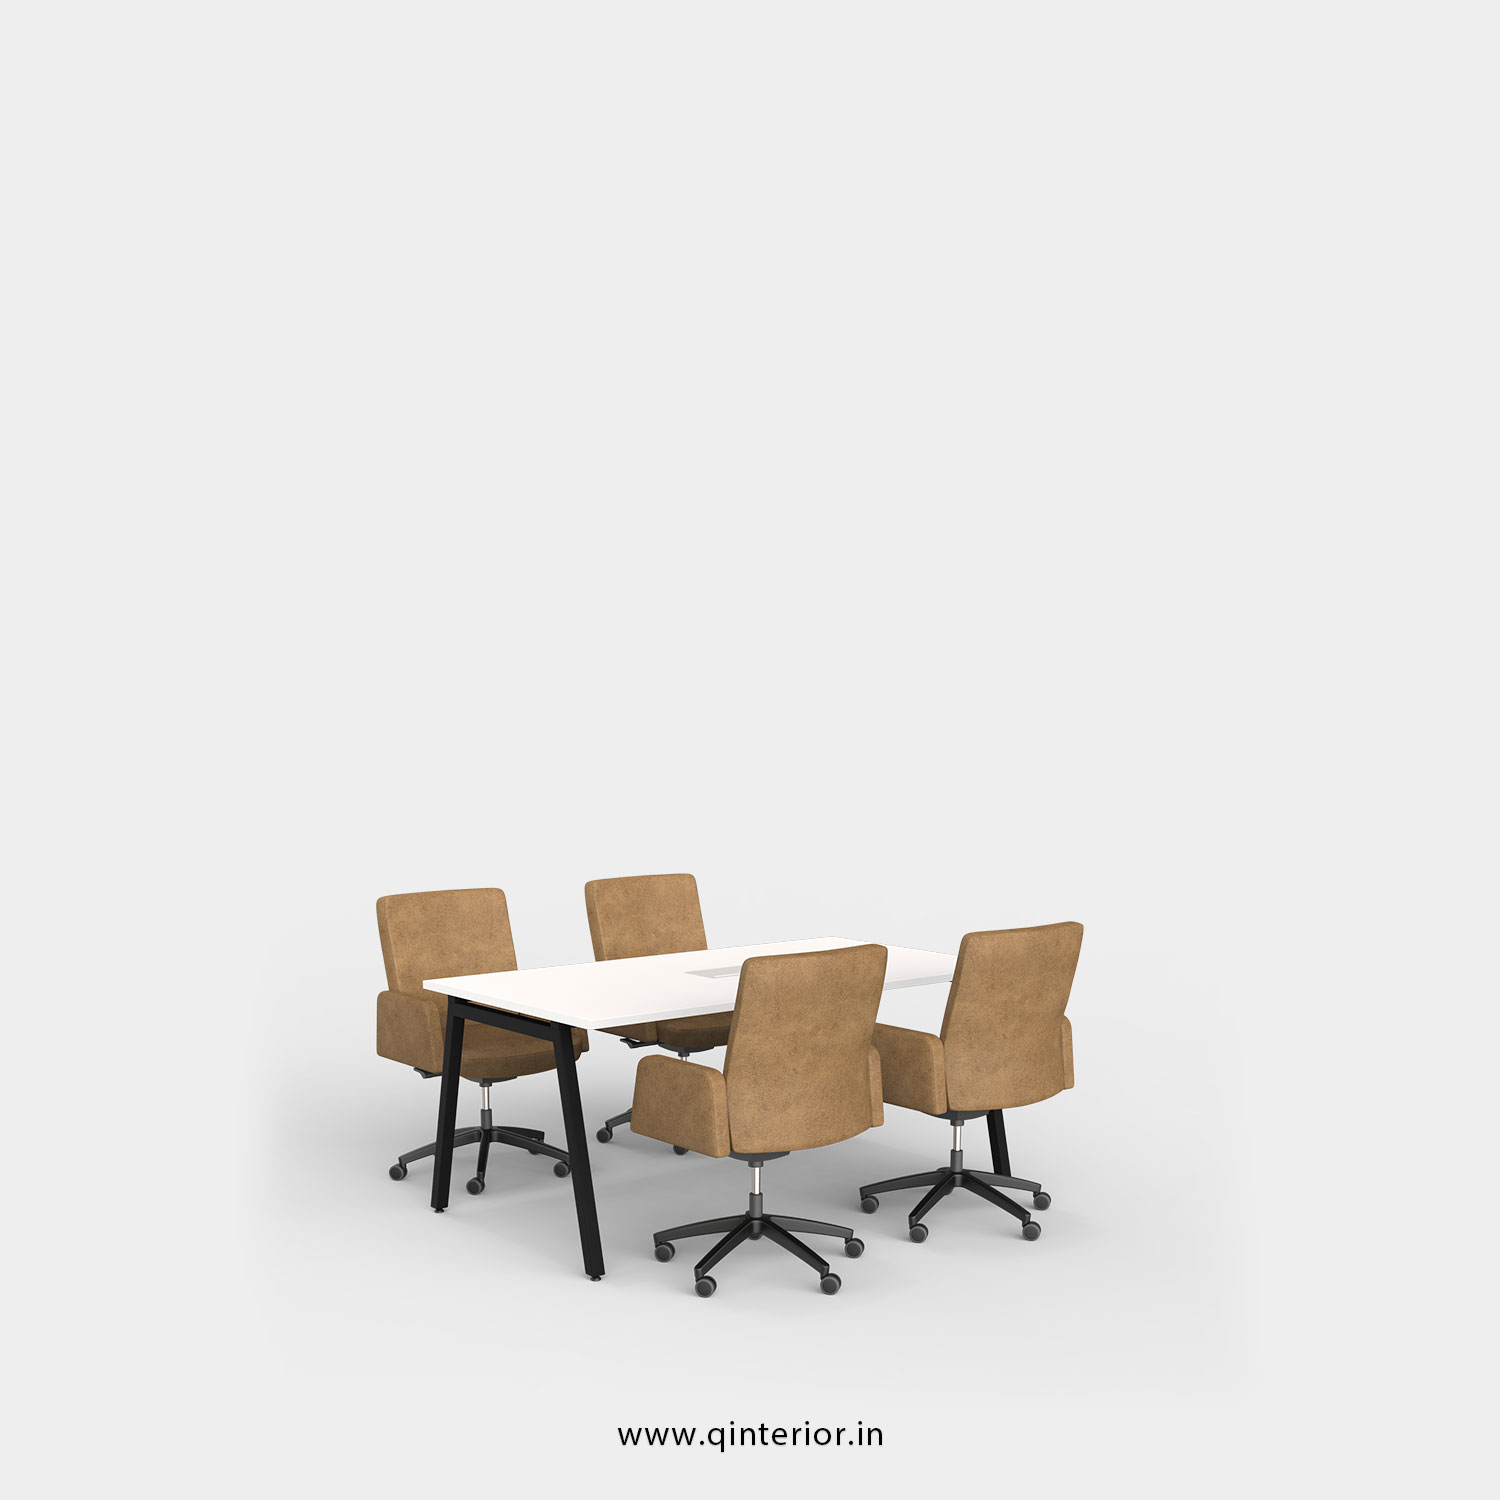 Berg Meeting Table in White Finish - OMT001 C4